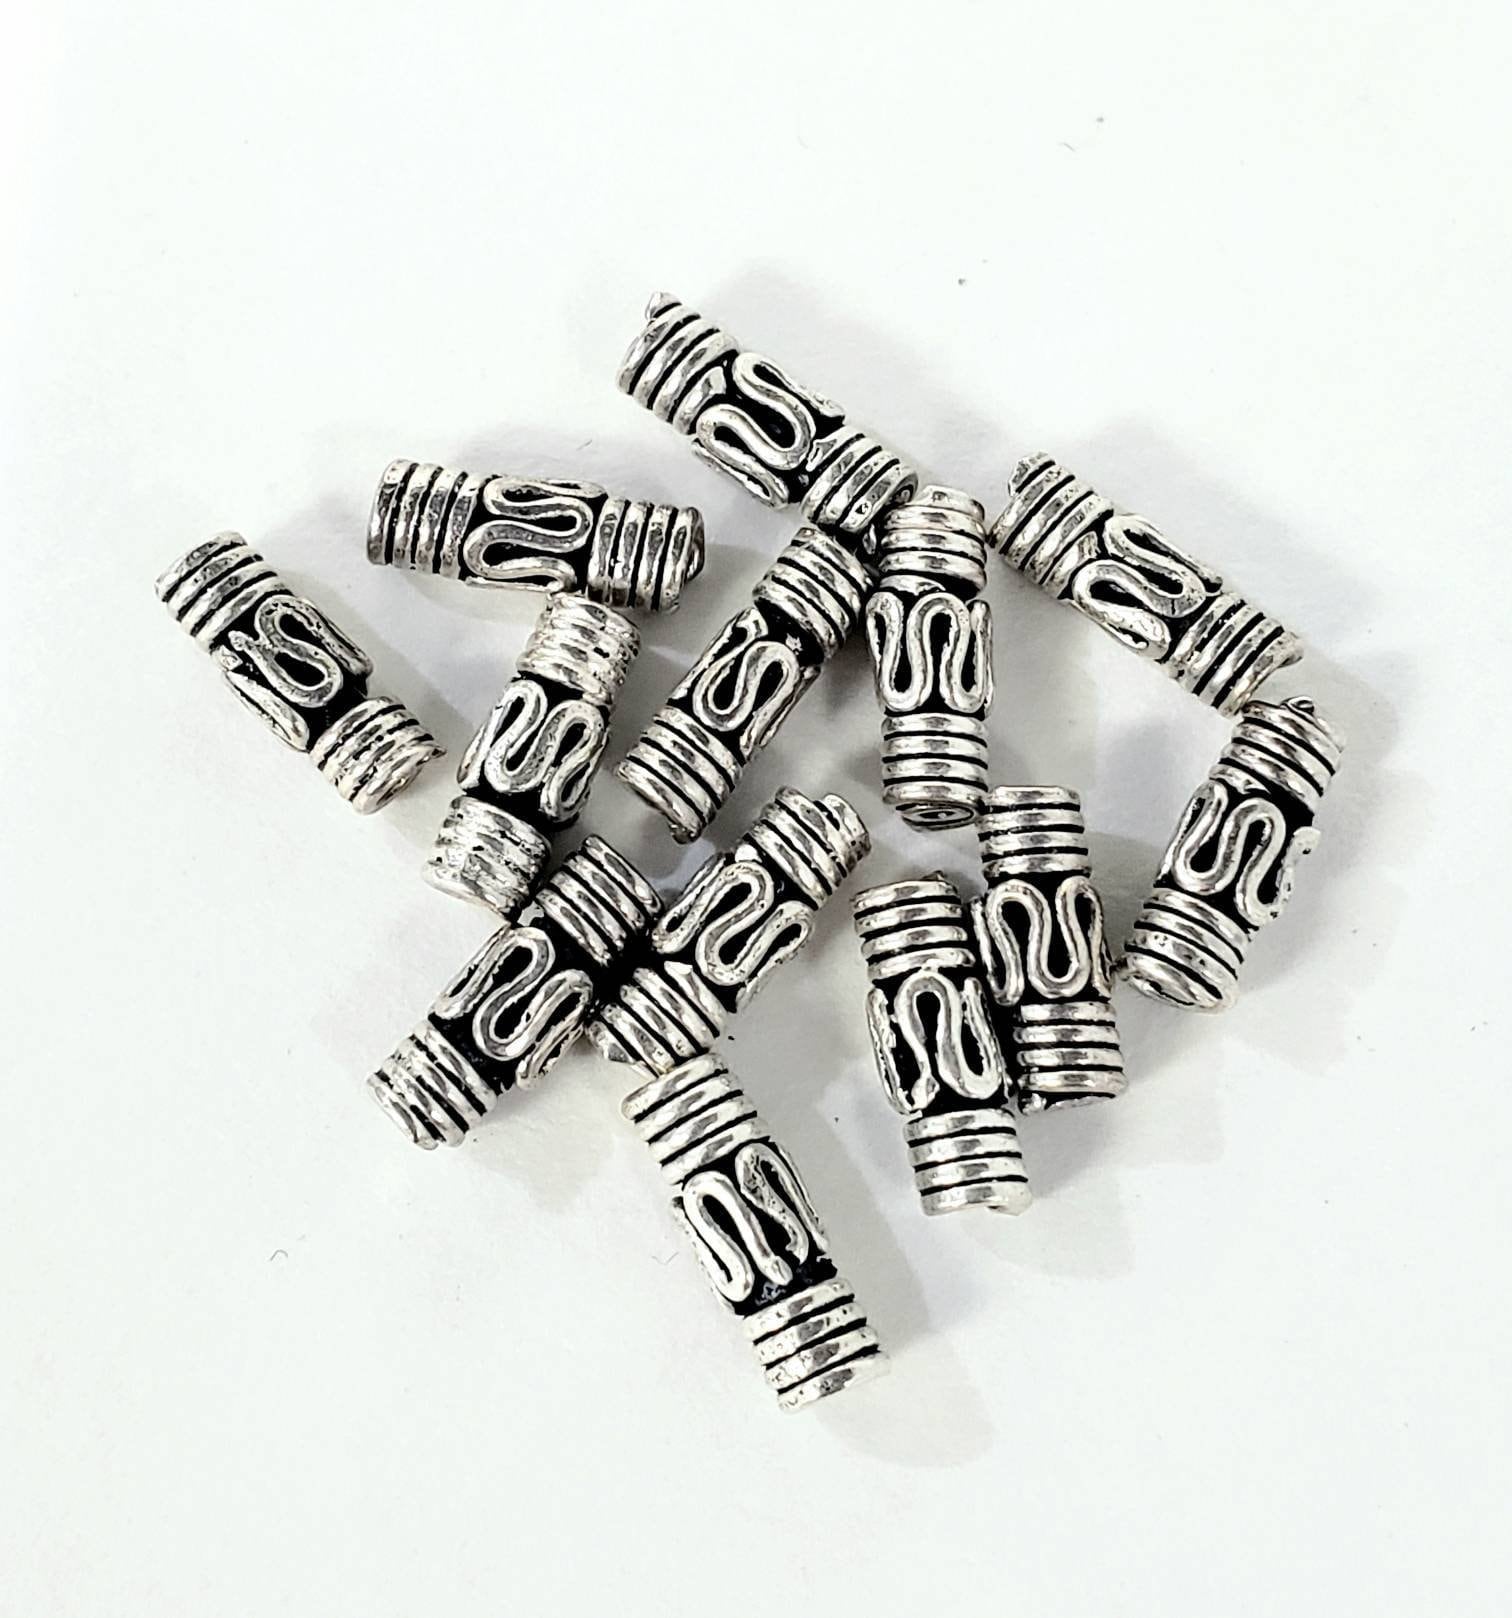 4 pcs 925 Sterling silver bali handmade vintage 9×13mm tube, pipe , spacer bead .925 silver jewelry making supplies.